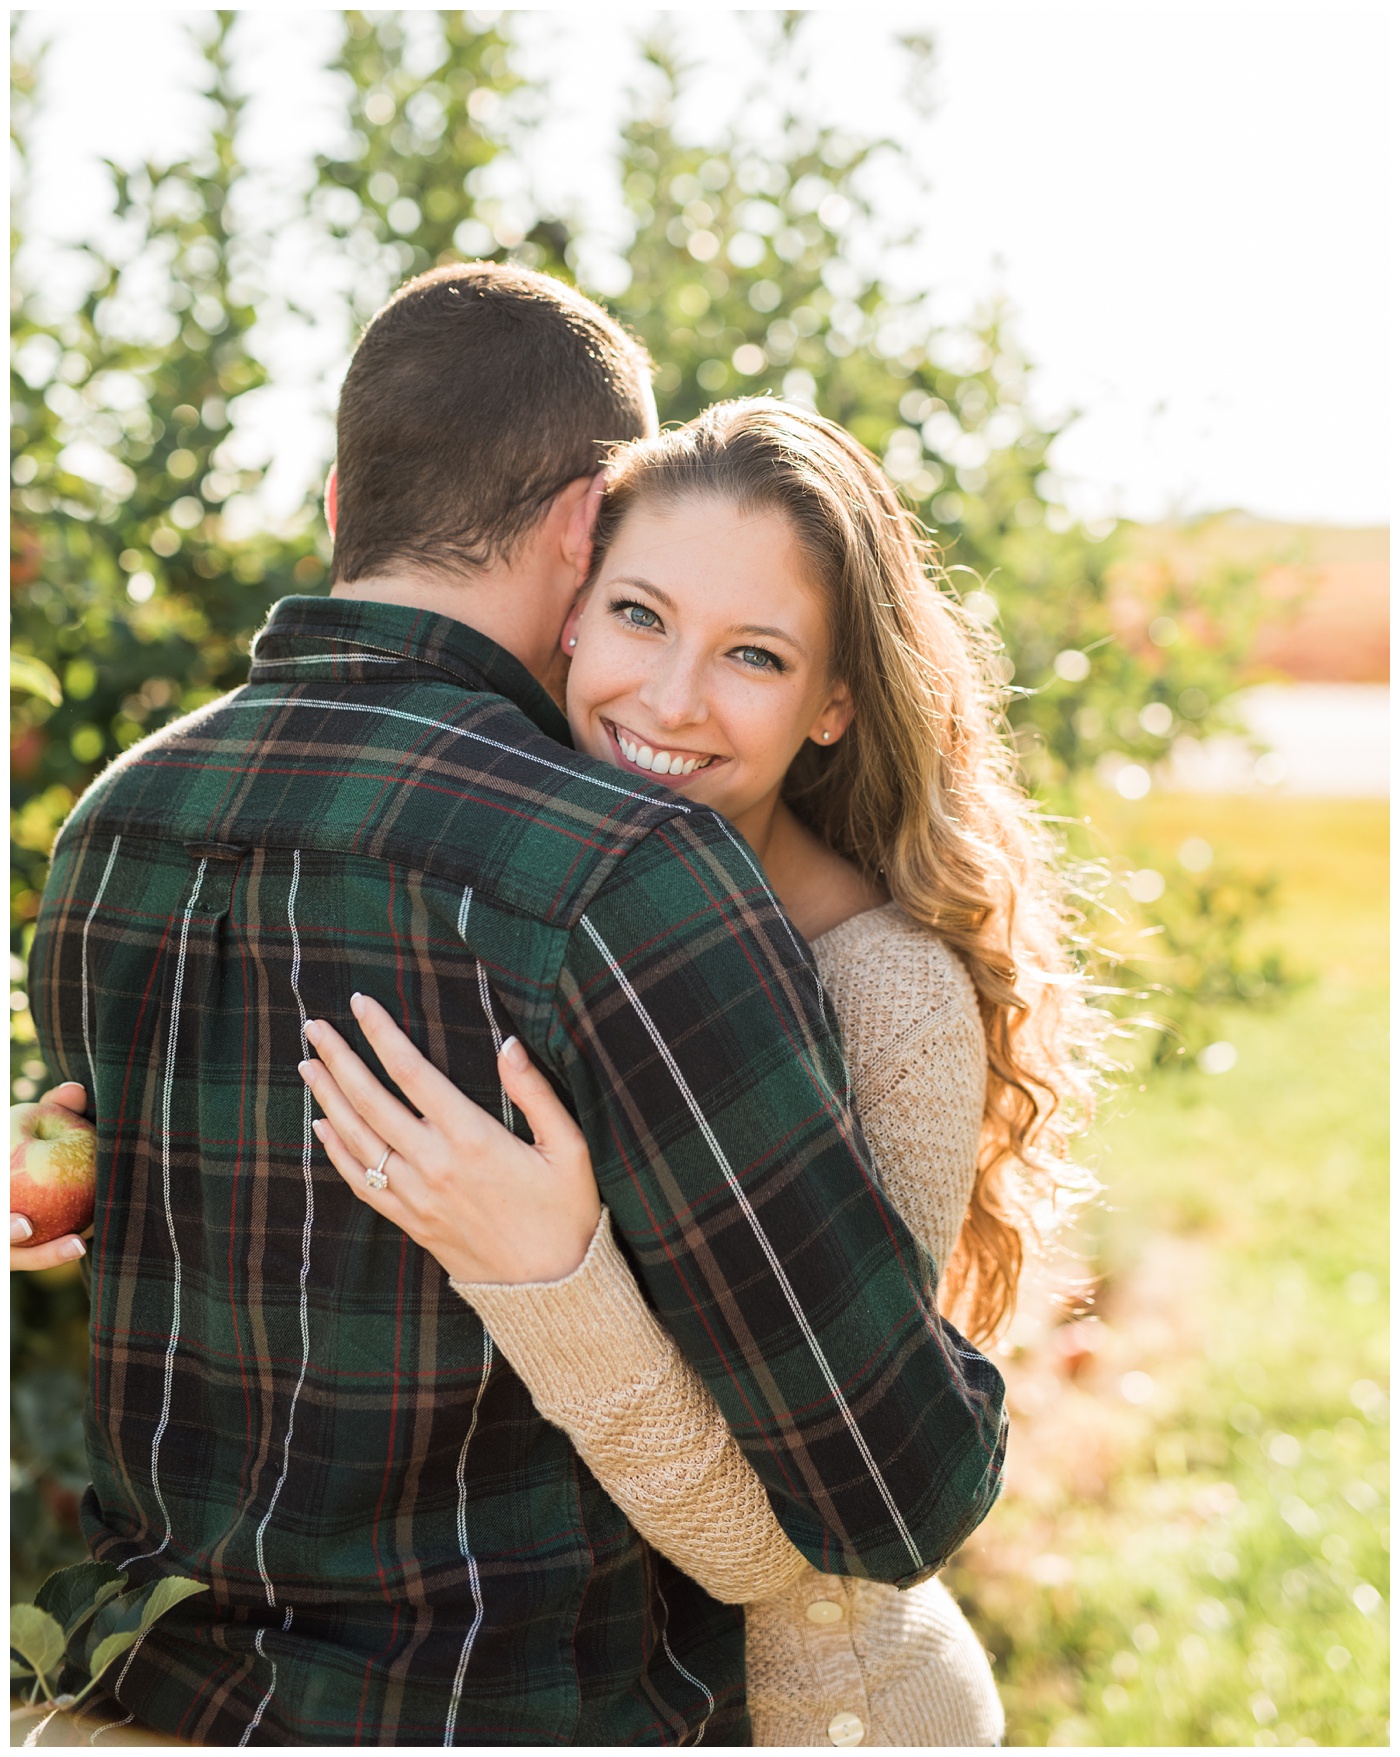 Engaged couple dancing in an apple orchard 